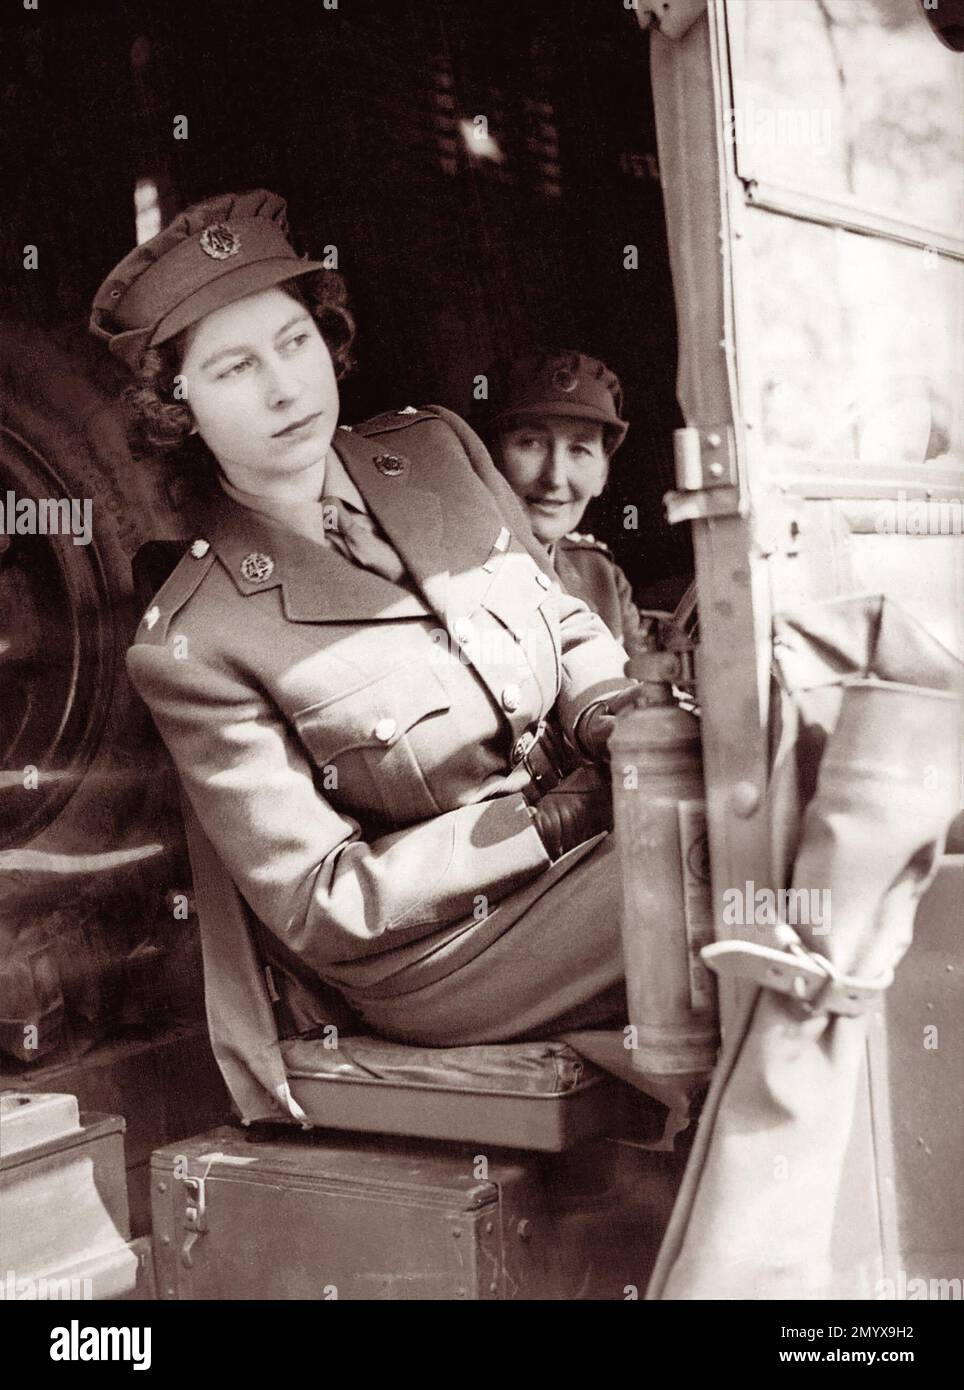 Princess Elizabeth (later Queen Elizabeth II) trains as an A.T.S. officer in 1945. Stock Photo